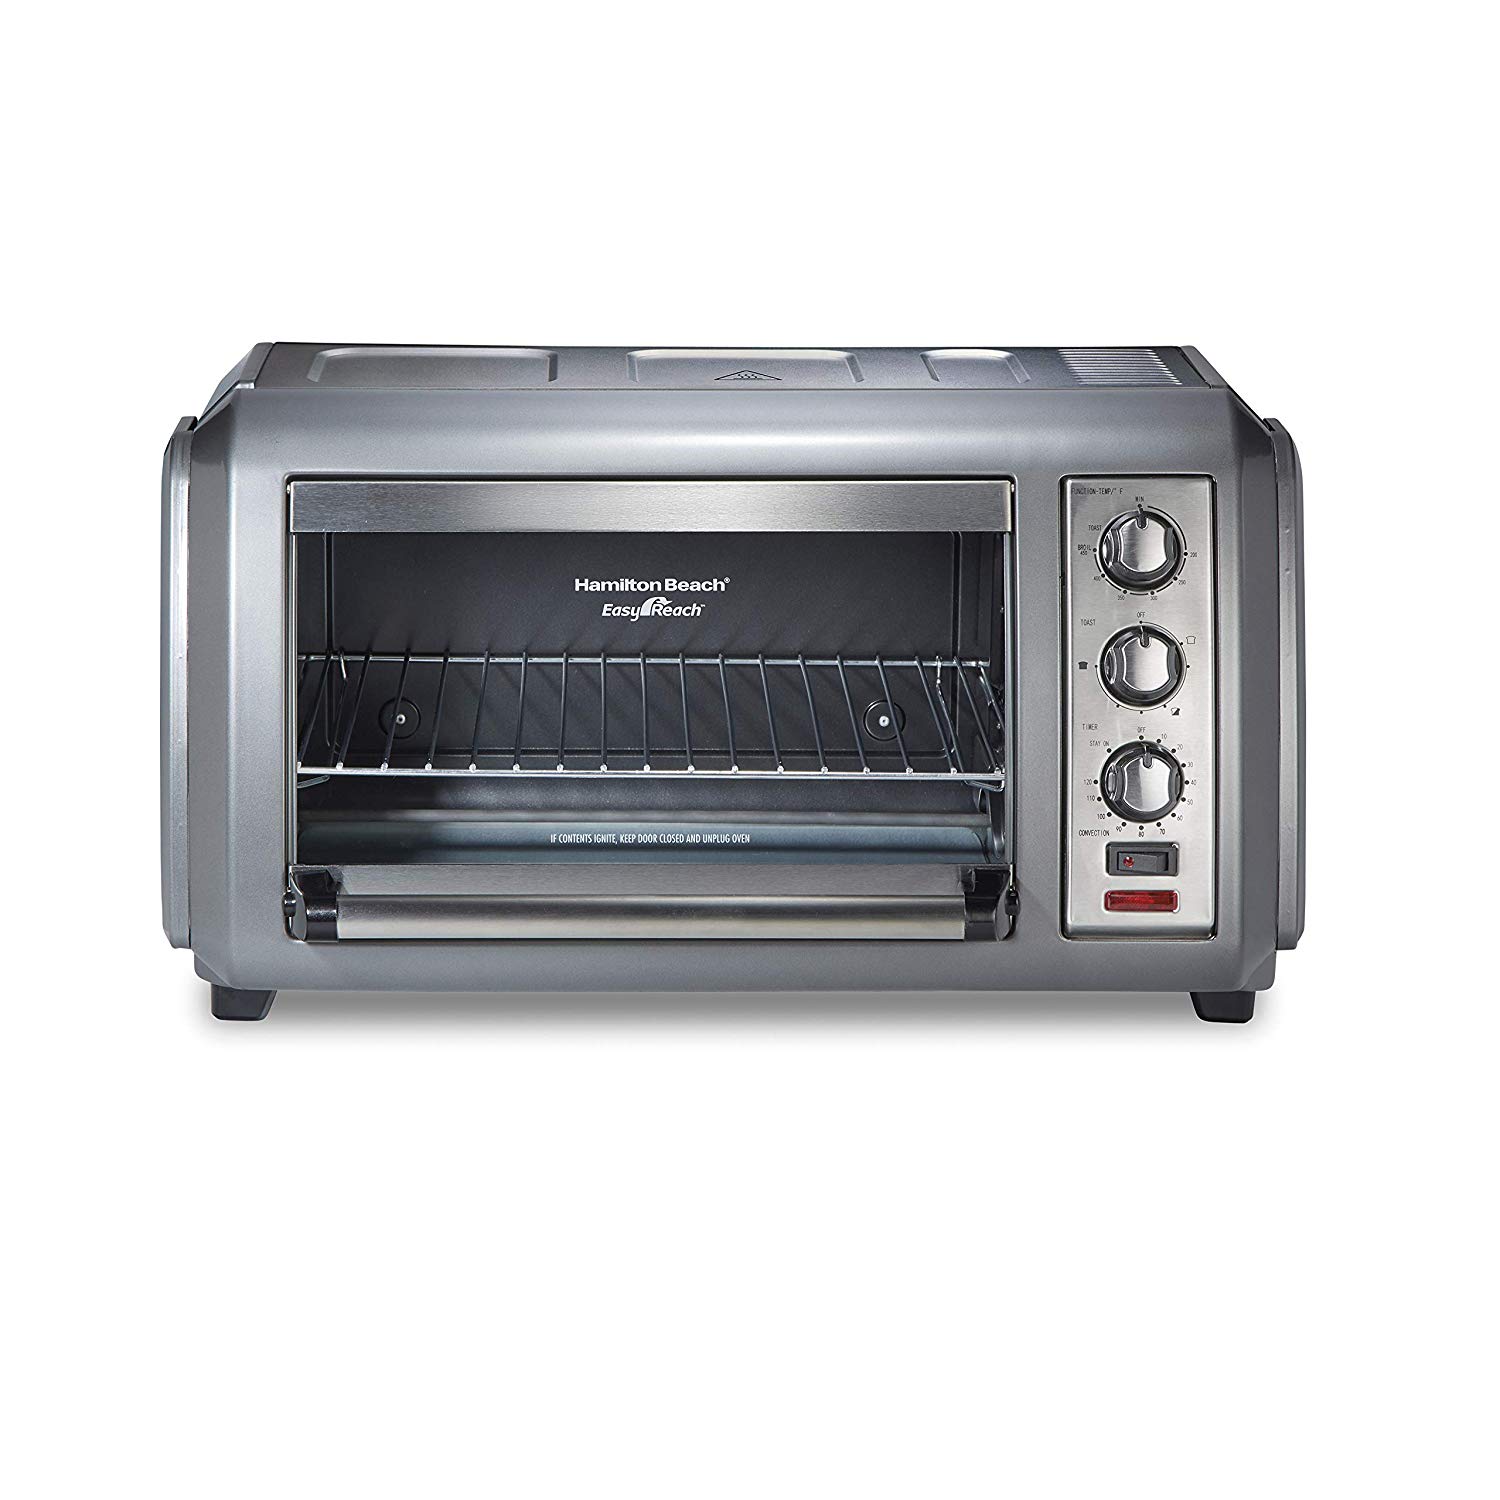 An image of Hamilton Beach 31434 Stainless Steel Convection Countertop Four Slice Toaster Oven